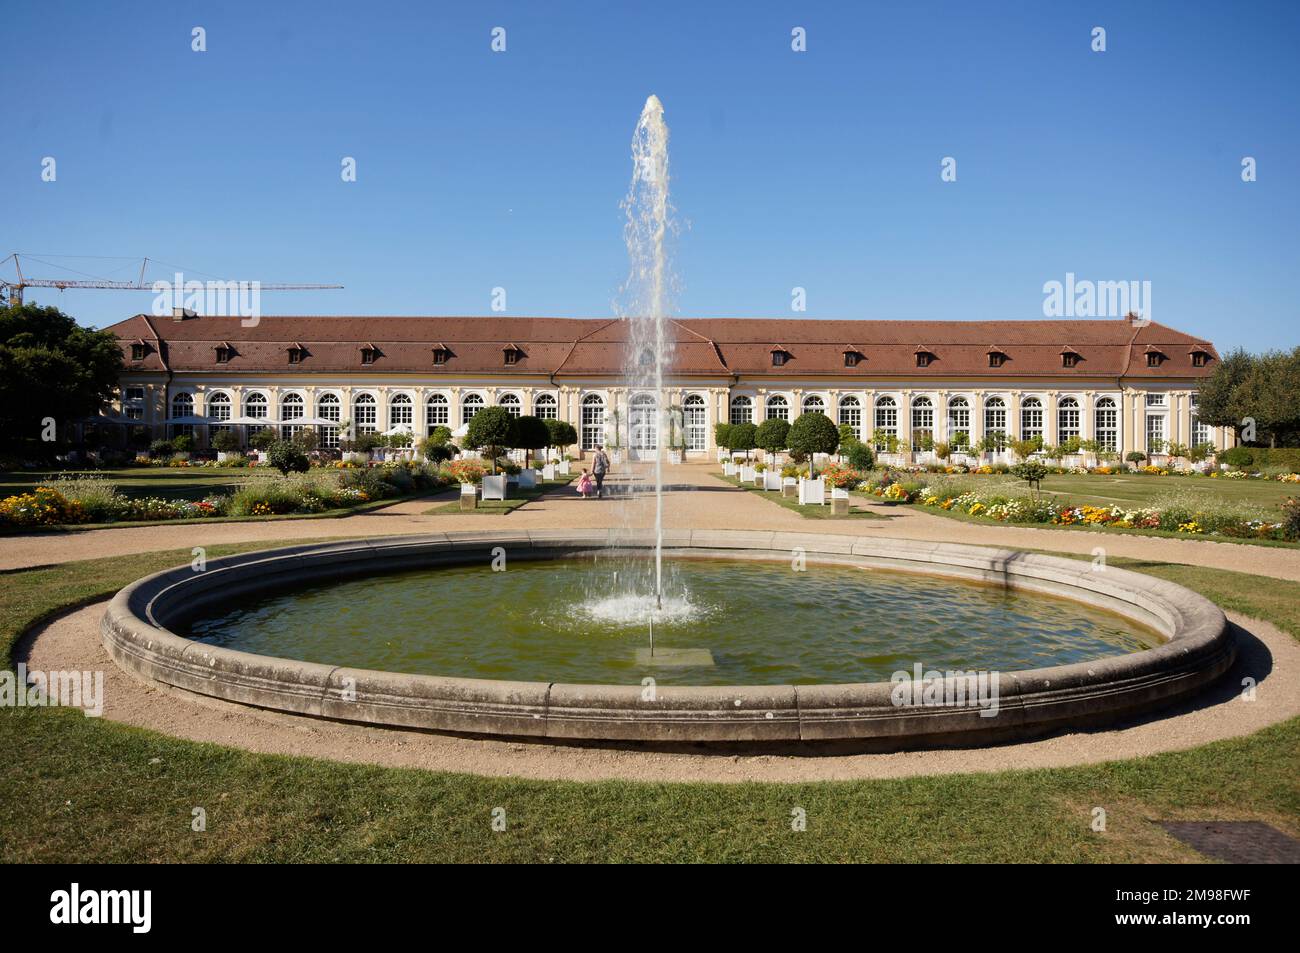 Germany - Bayern - Ansbach: Orangerie of the Palace (AD 1713) - fountain. Stock Photo